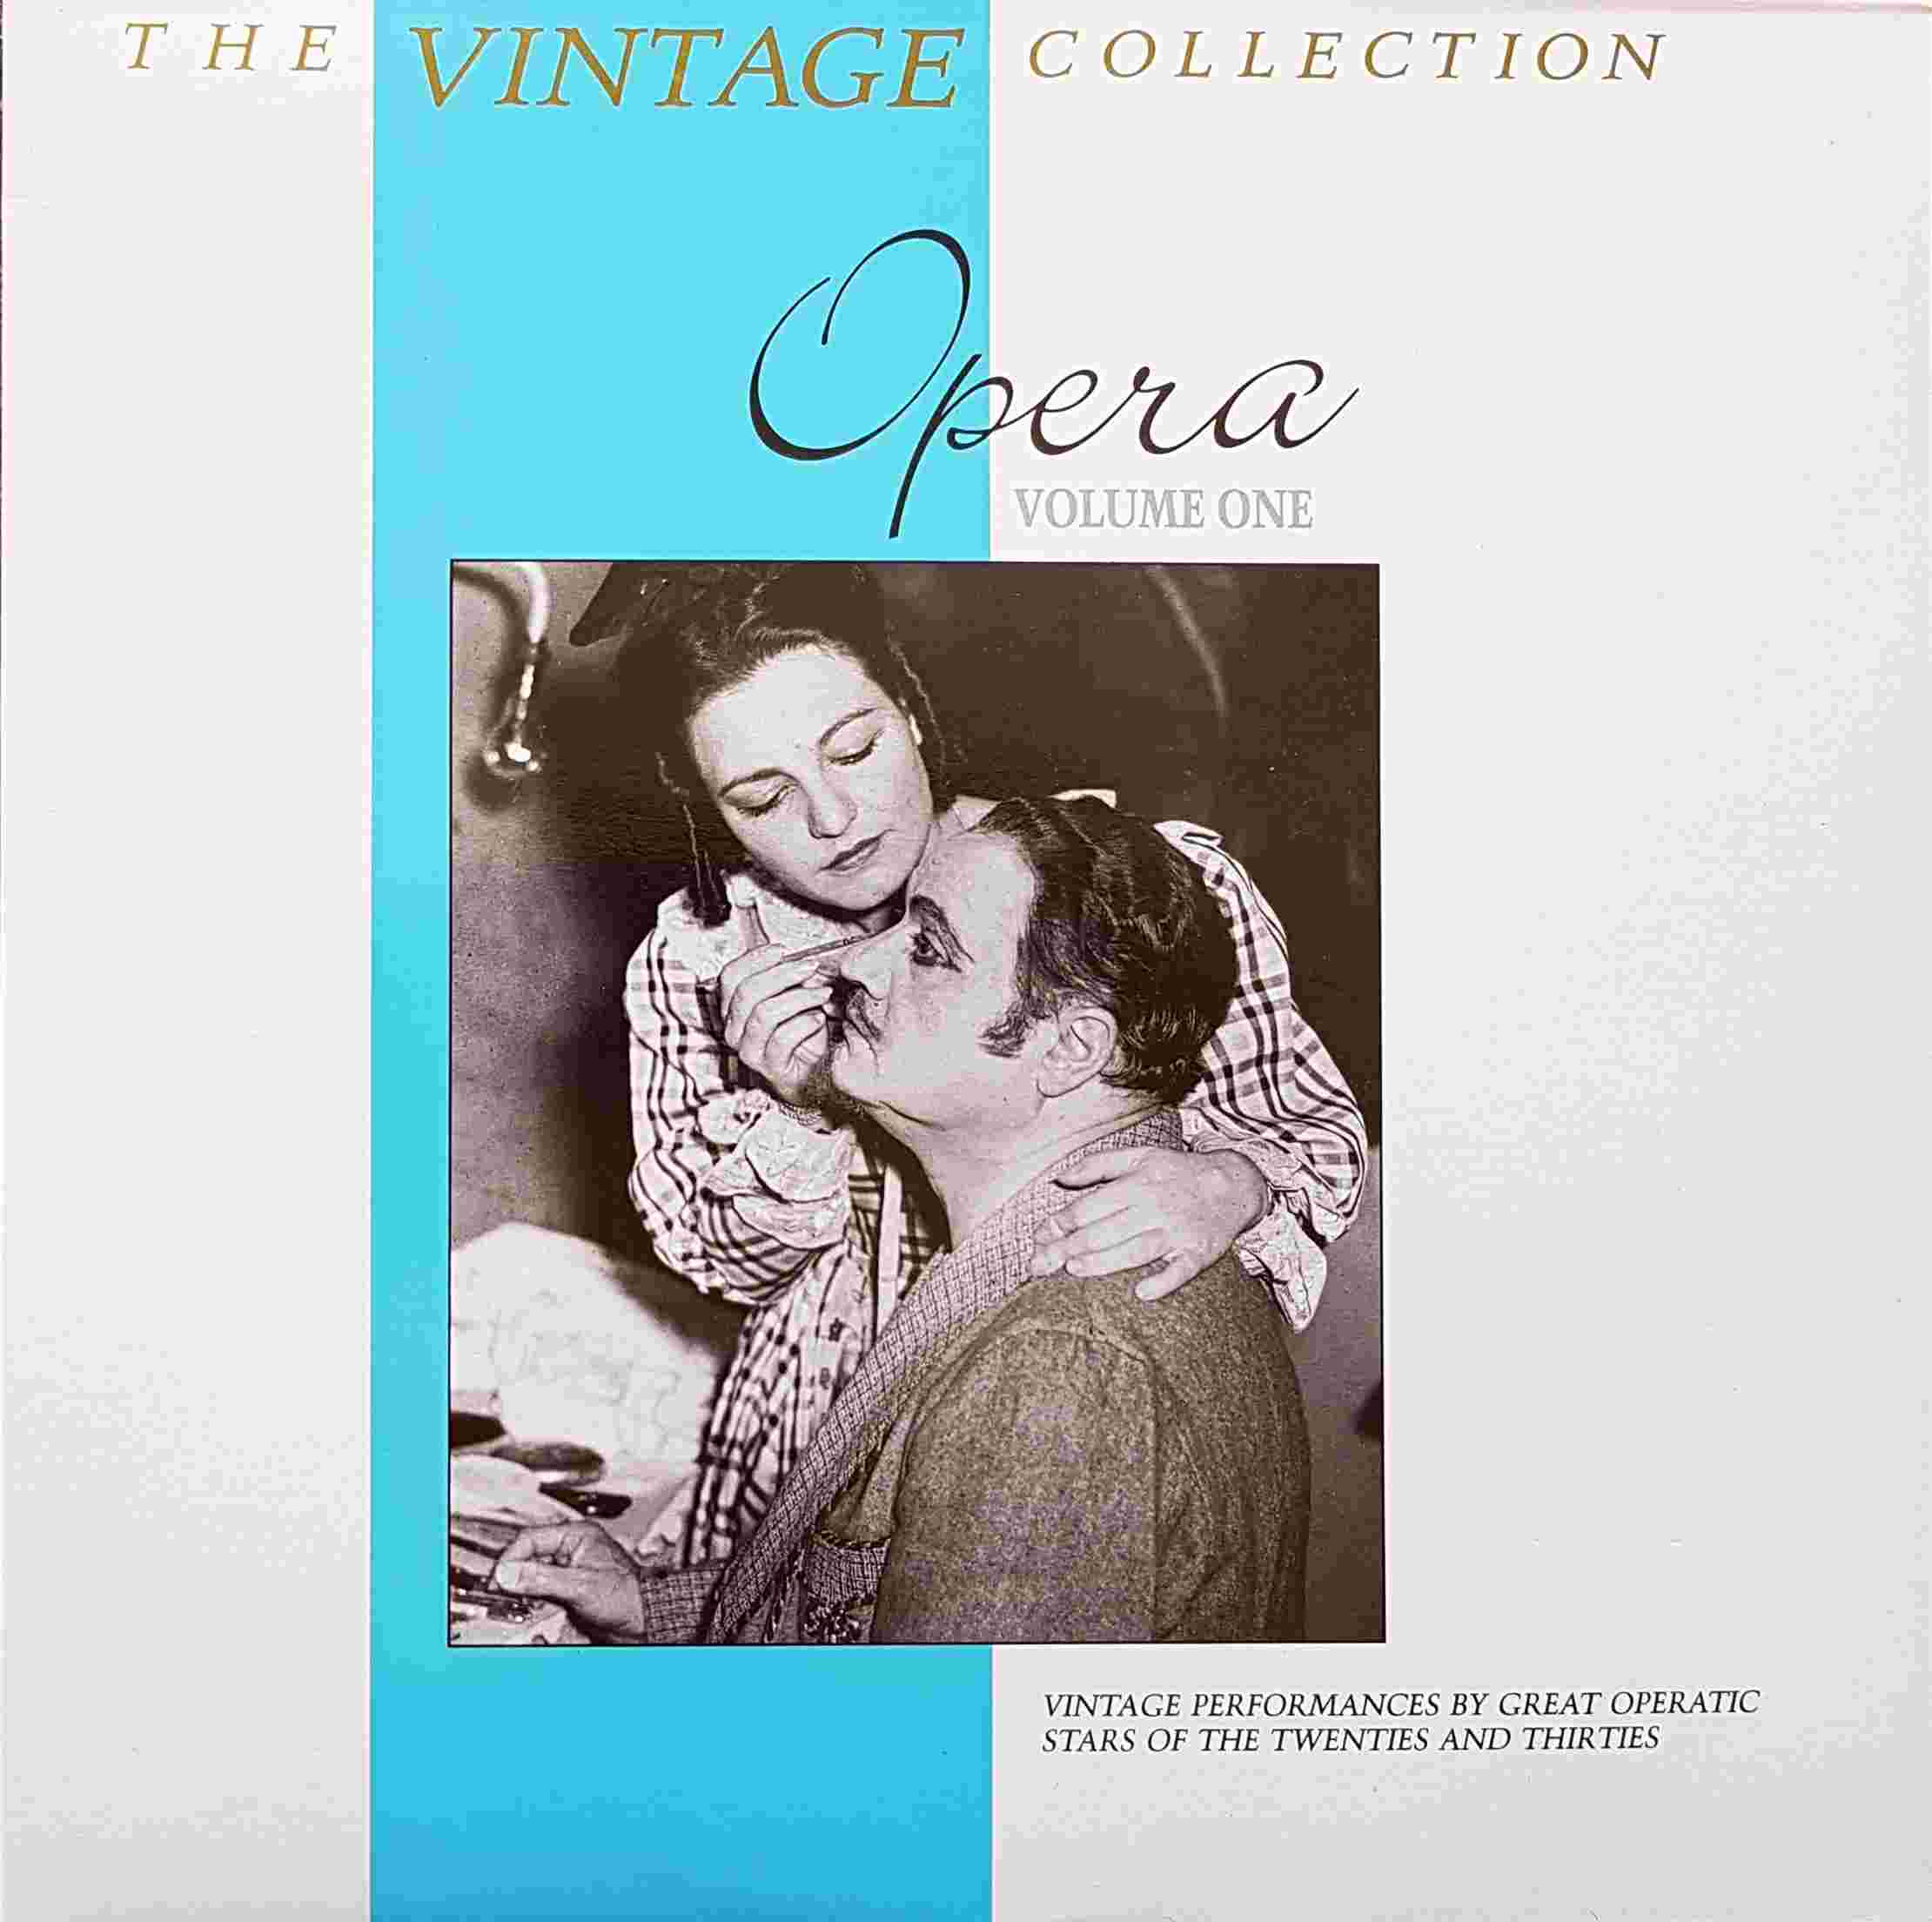 Picture of REH 715 The vintage collection - Opera by artist Various from the BBC albums - Records and Tapes library